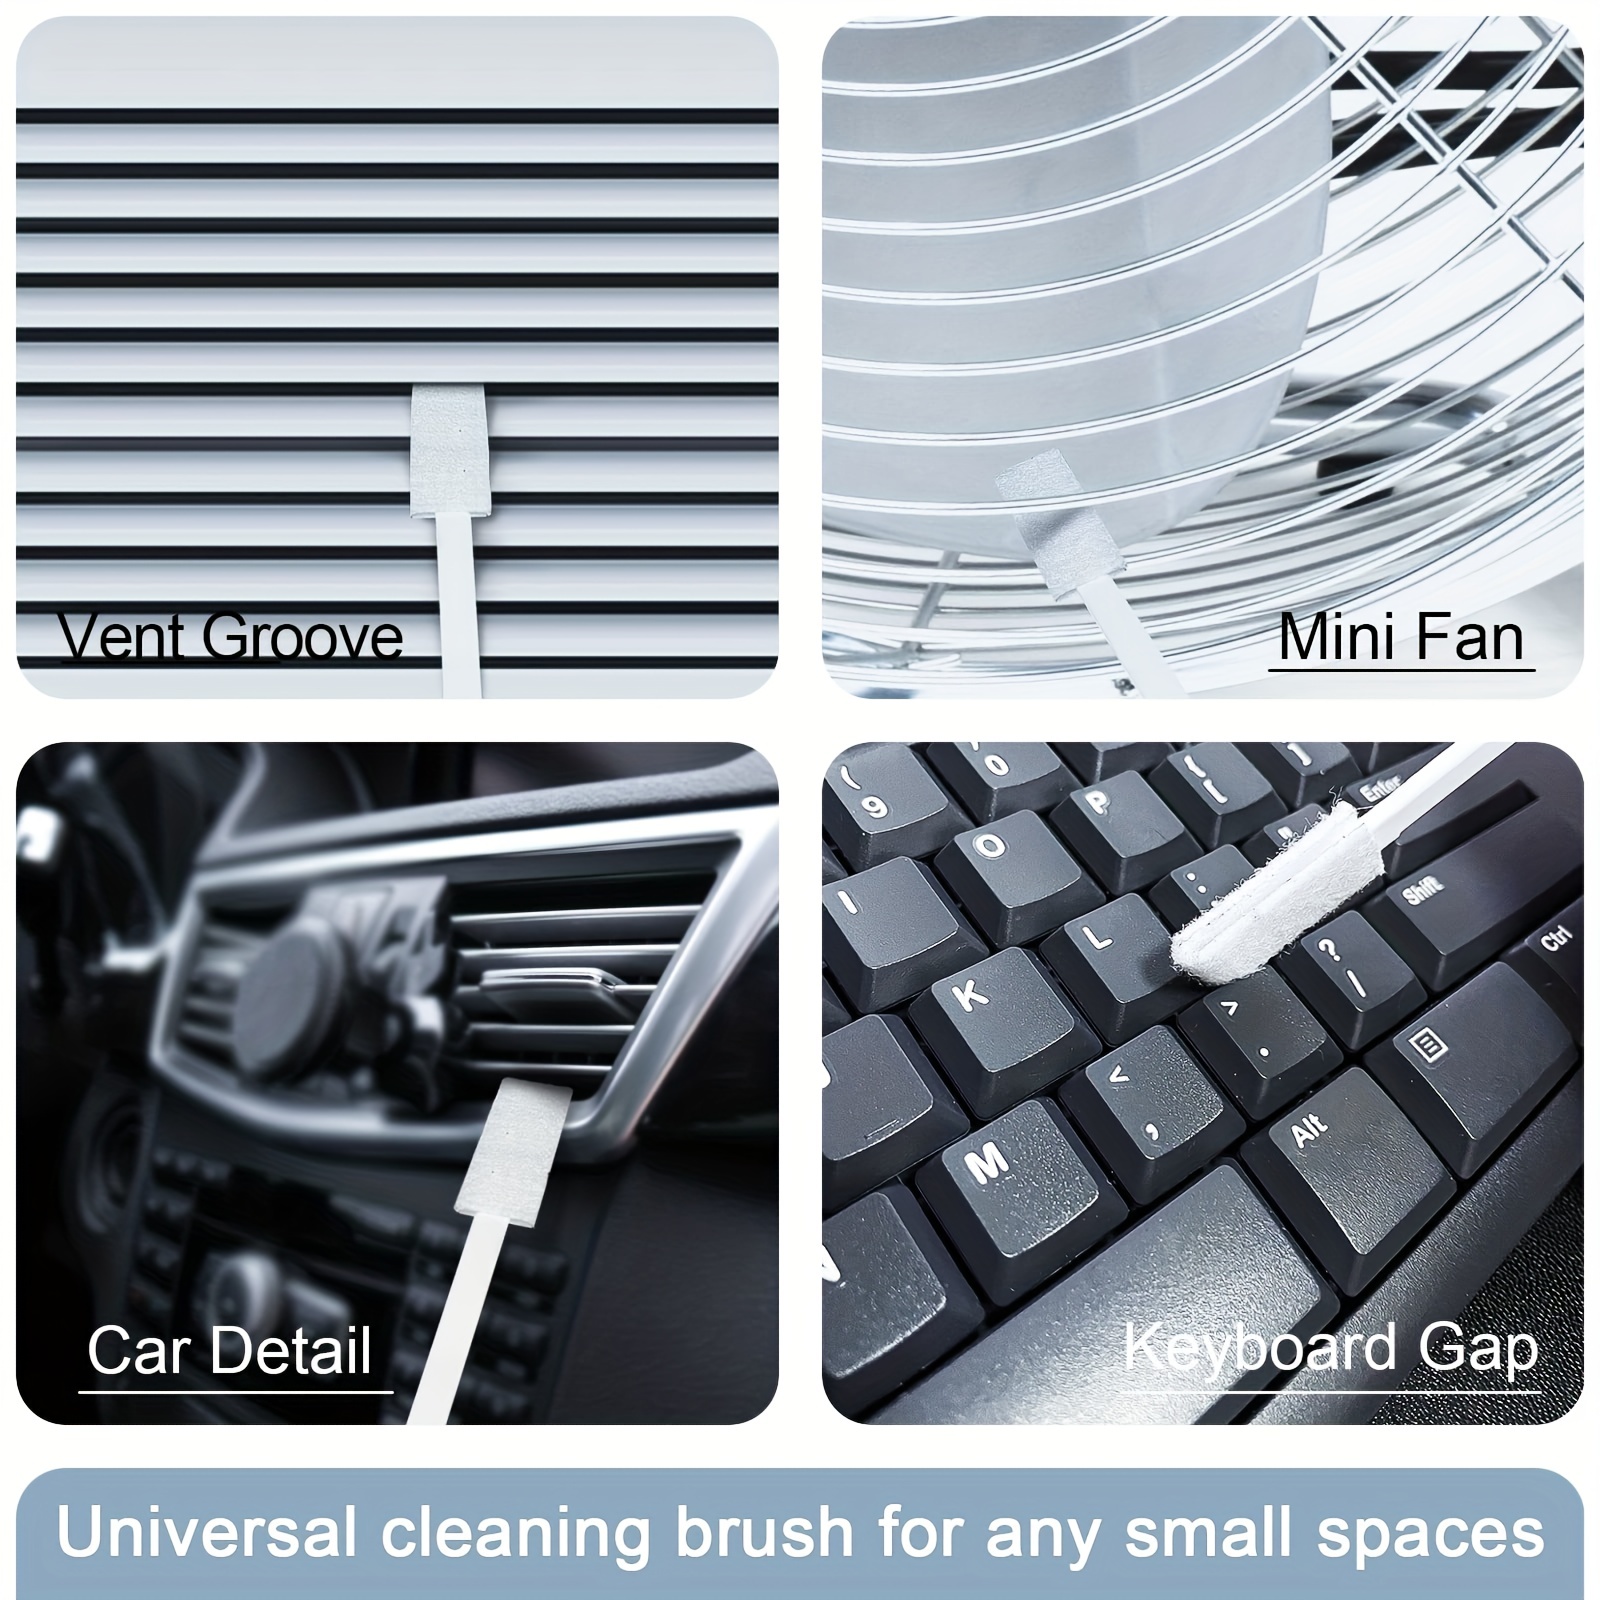 50 PCS Small Disposable Crevice Cleaning Brushes for Toilet Corner Skinny  Window Groove Door Track Keyboard,Gap Cleaner Scrub Detail Cleansing Brushes  for Kitchen Stove,Blind,Fan 